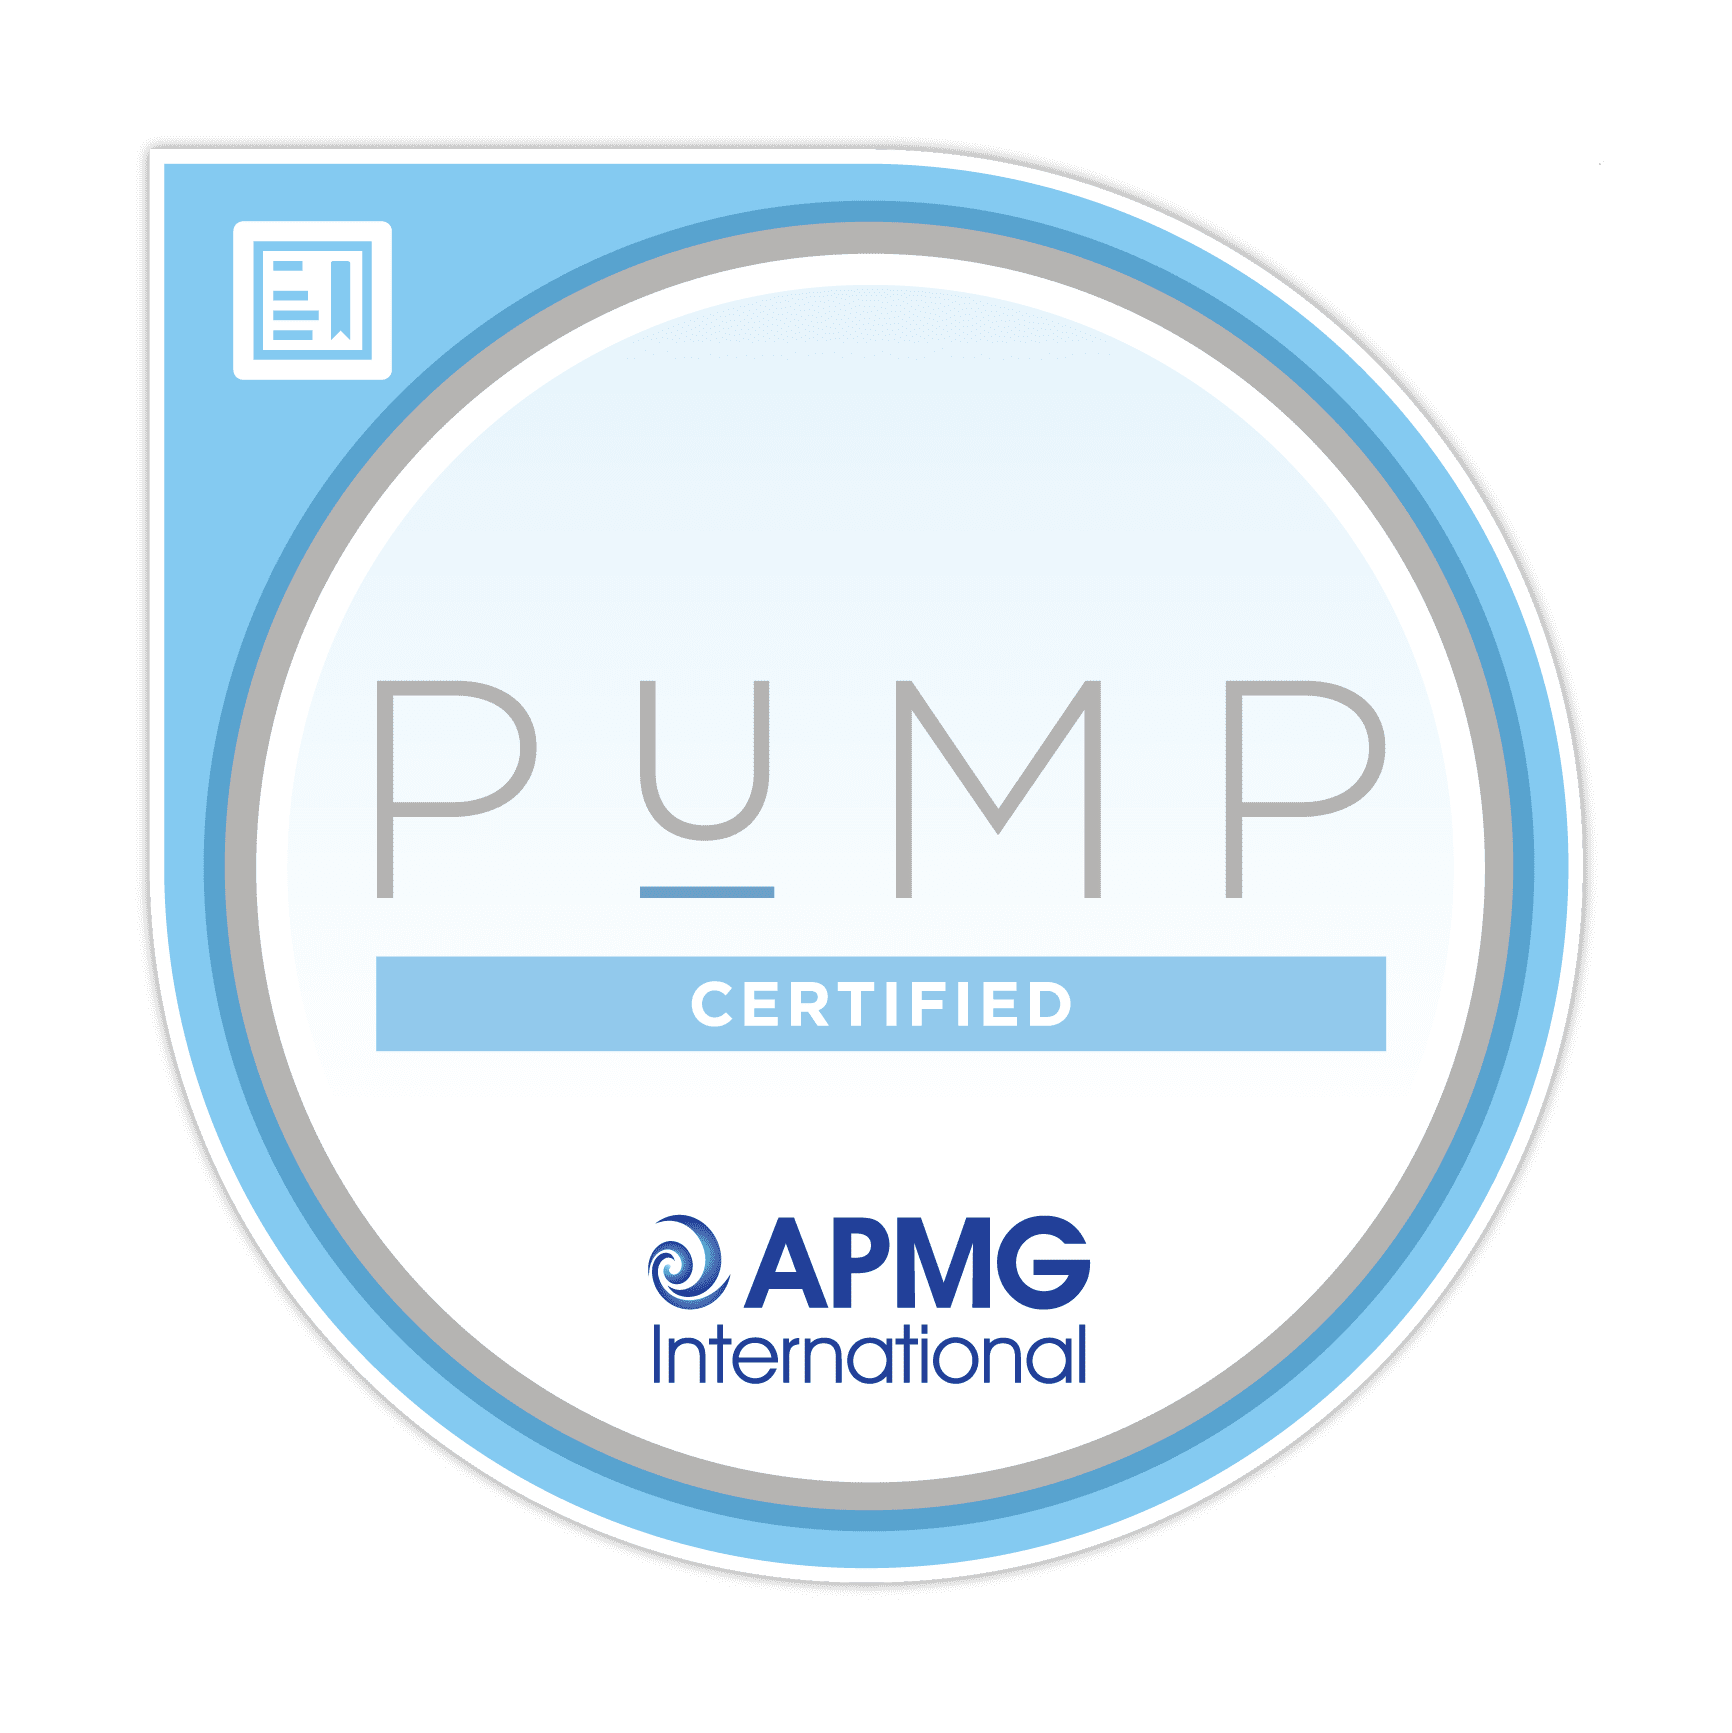 PuMP Certification Badge provided by APMG